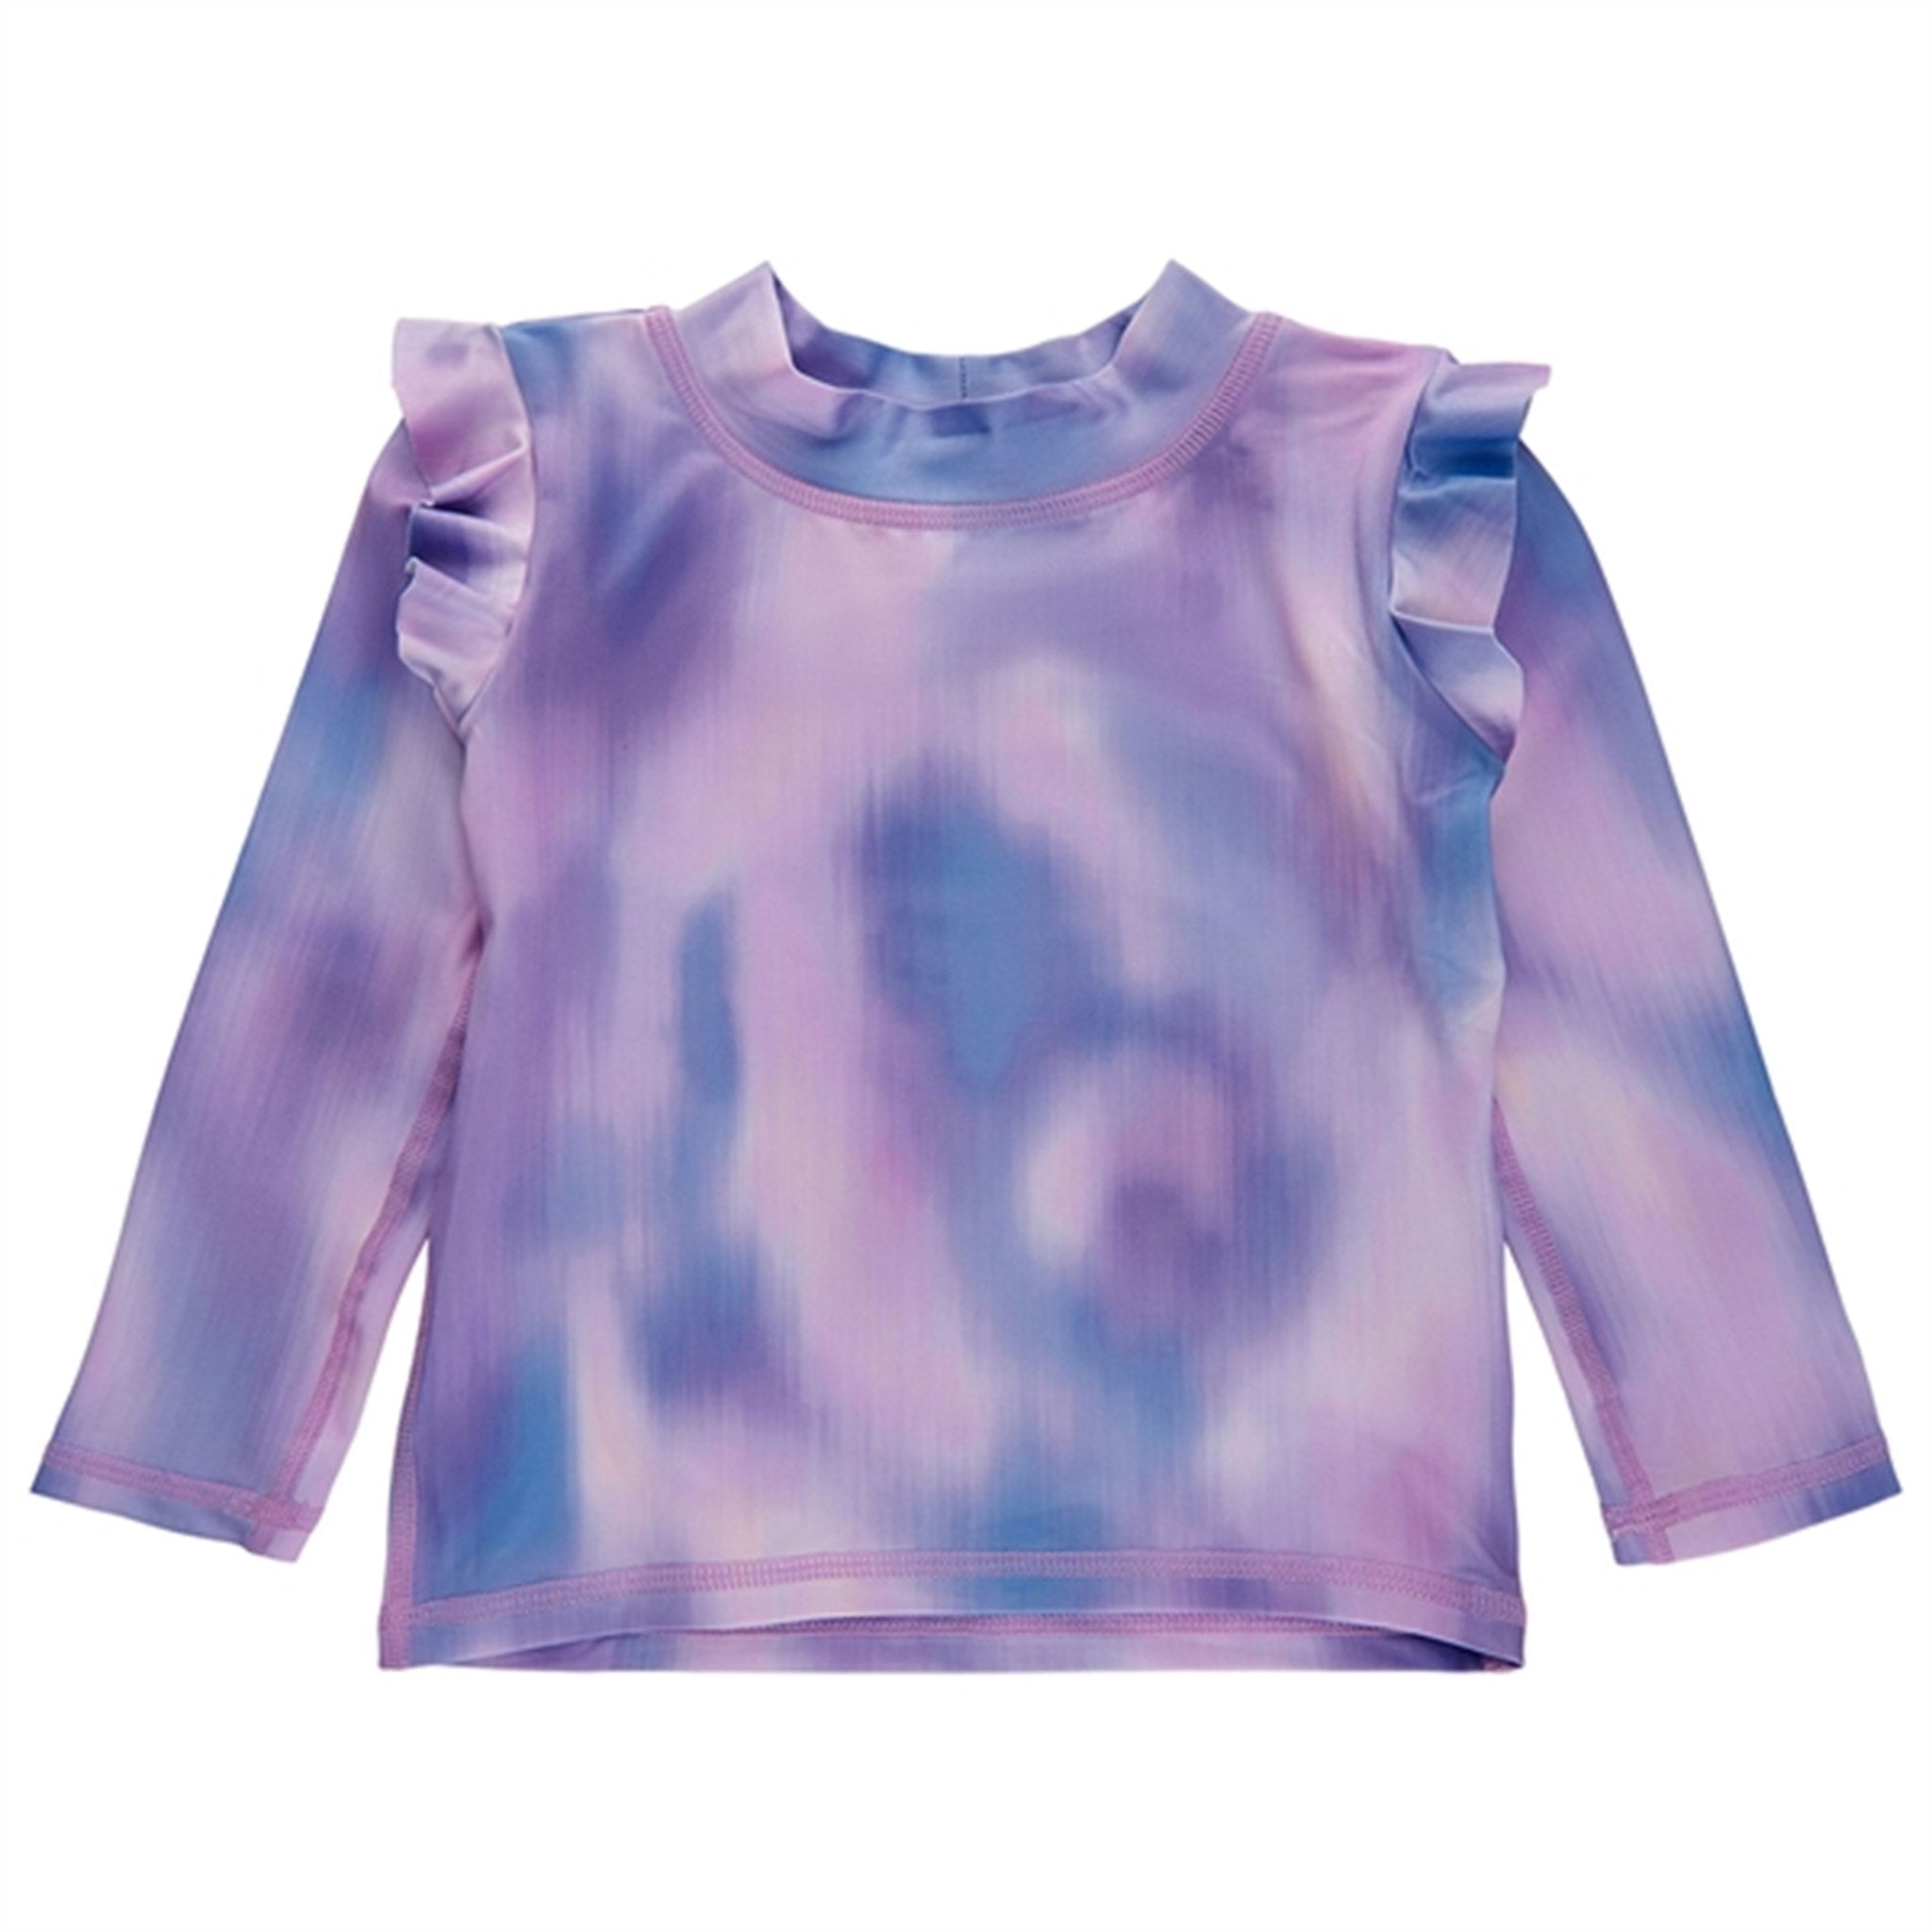 Soft Gallery Orchid Bloom Baby Fee Reflections Purple Sun Shirt